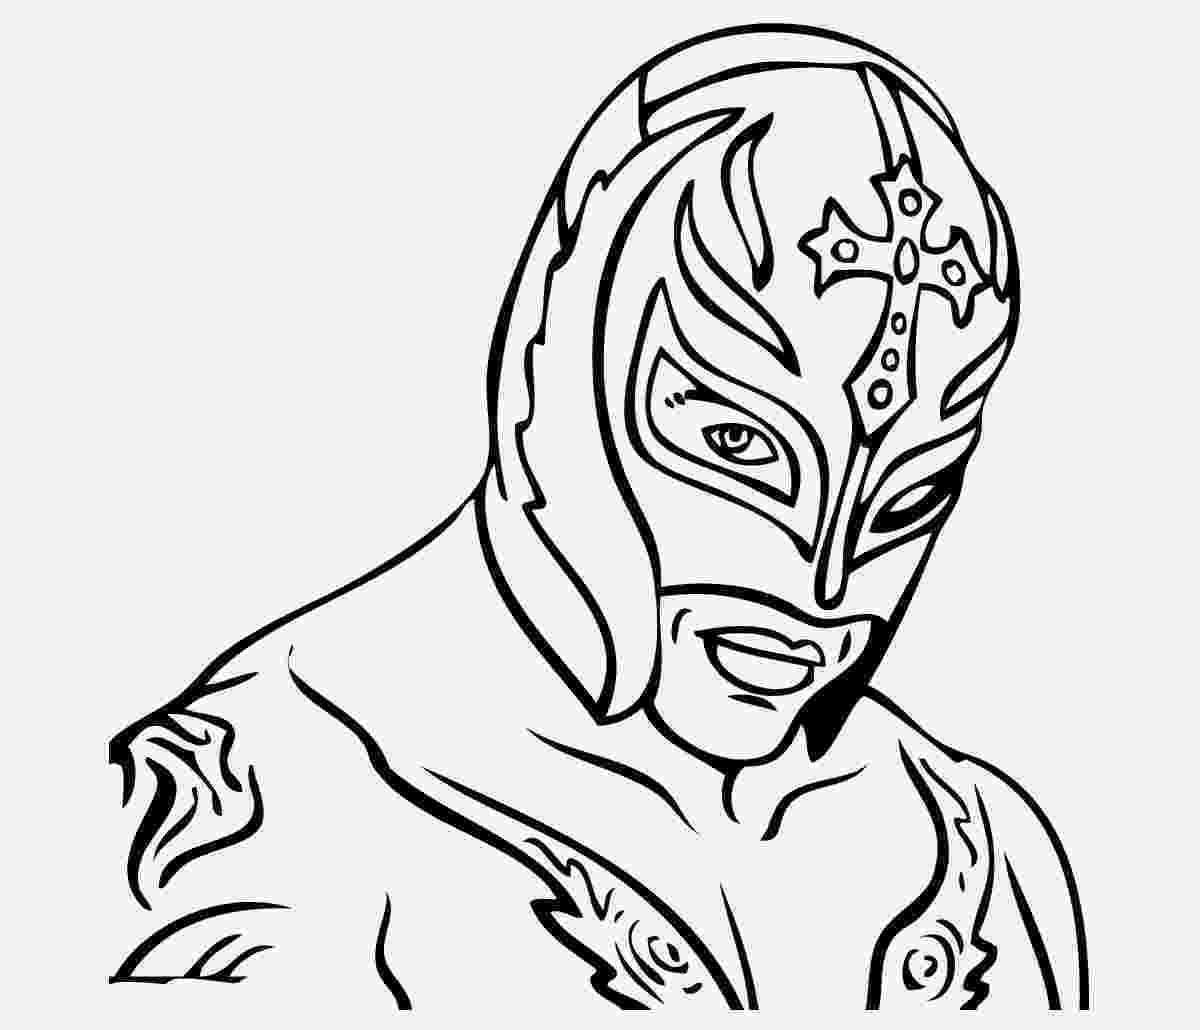 wwe printables 19 best wrestling wwe coloring pages for kids updated 2018 wwe printables 1 1